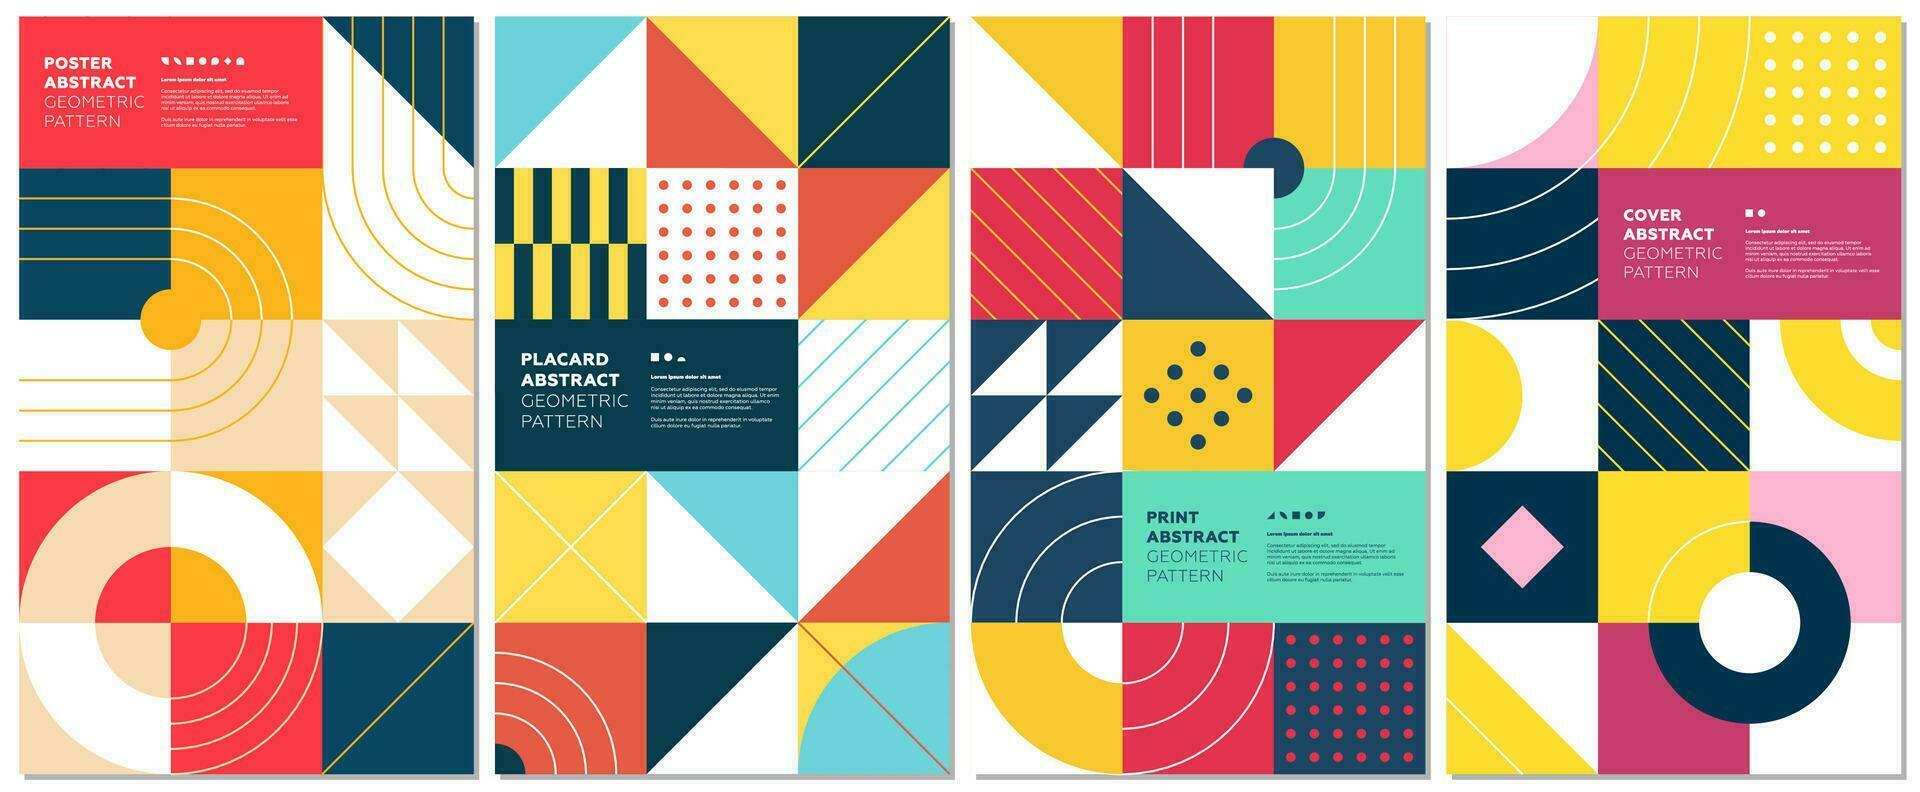 Abstract geometric bauhaus artwork. Simple brutalism shapes combination poster. Memphis pattern background. Retro brutalist style modern trendy graphic placard. Vintage postmodern art color eps print vector